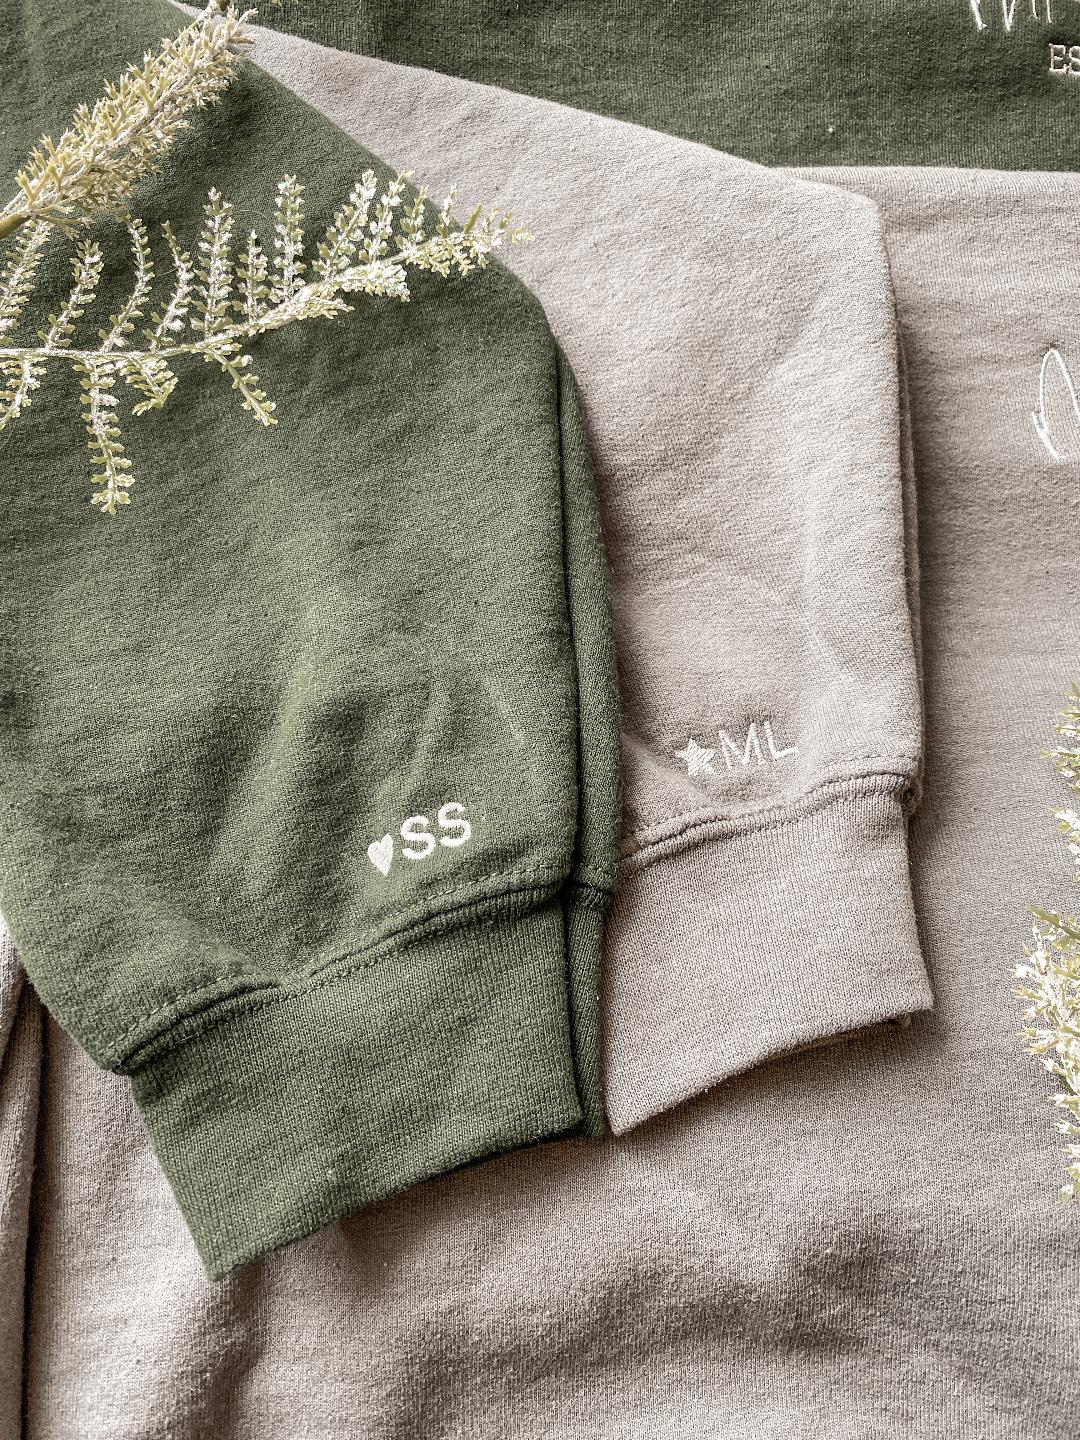 Custom Initials on the Sleeve | Include this listing in a purchase of your crewneck/jacket